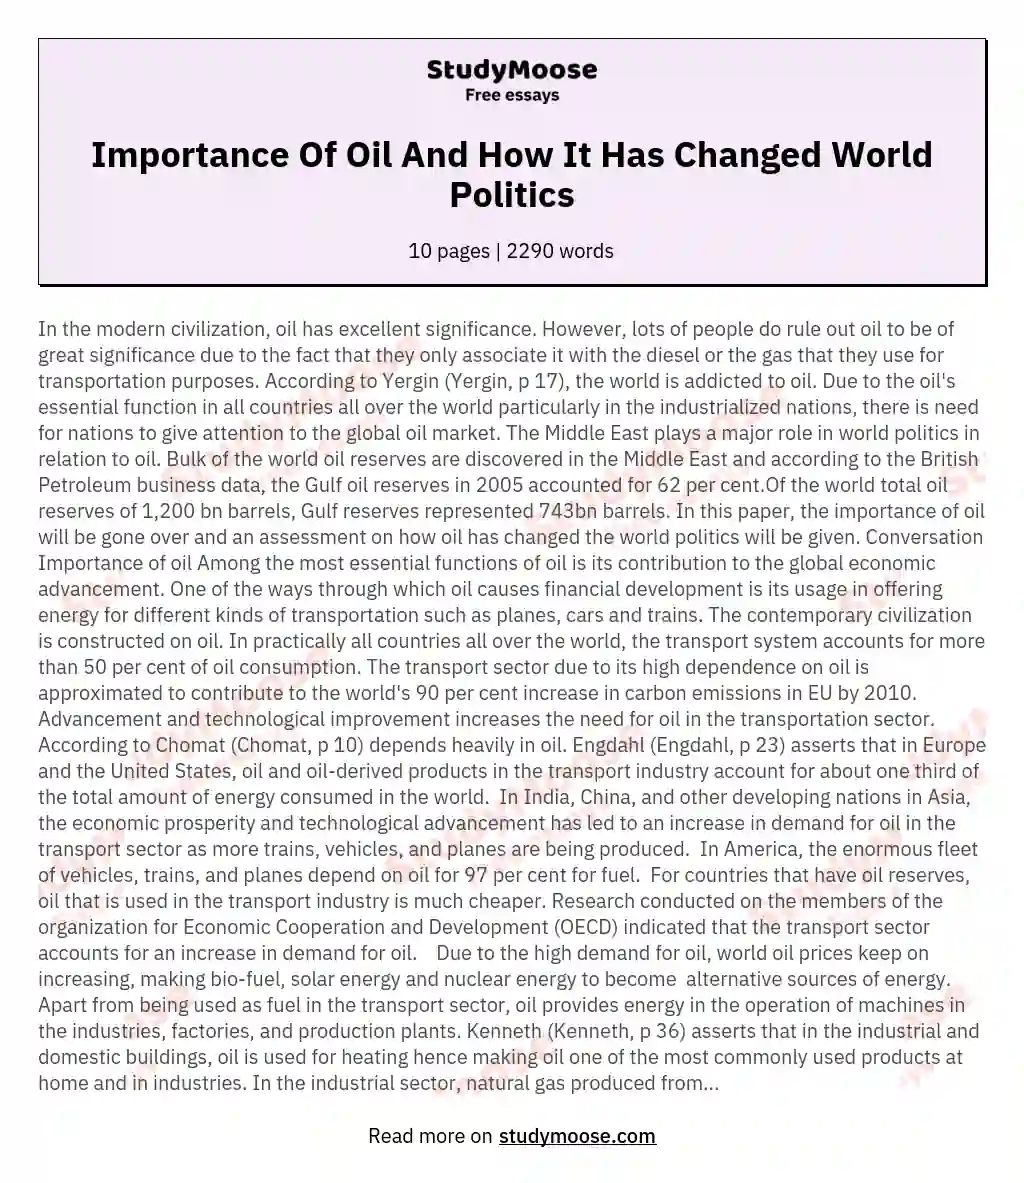 Importance Of Oil And How It Has Changed World Politics essay